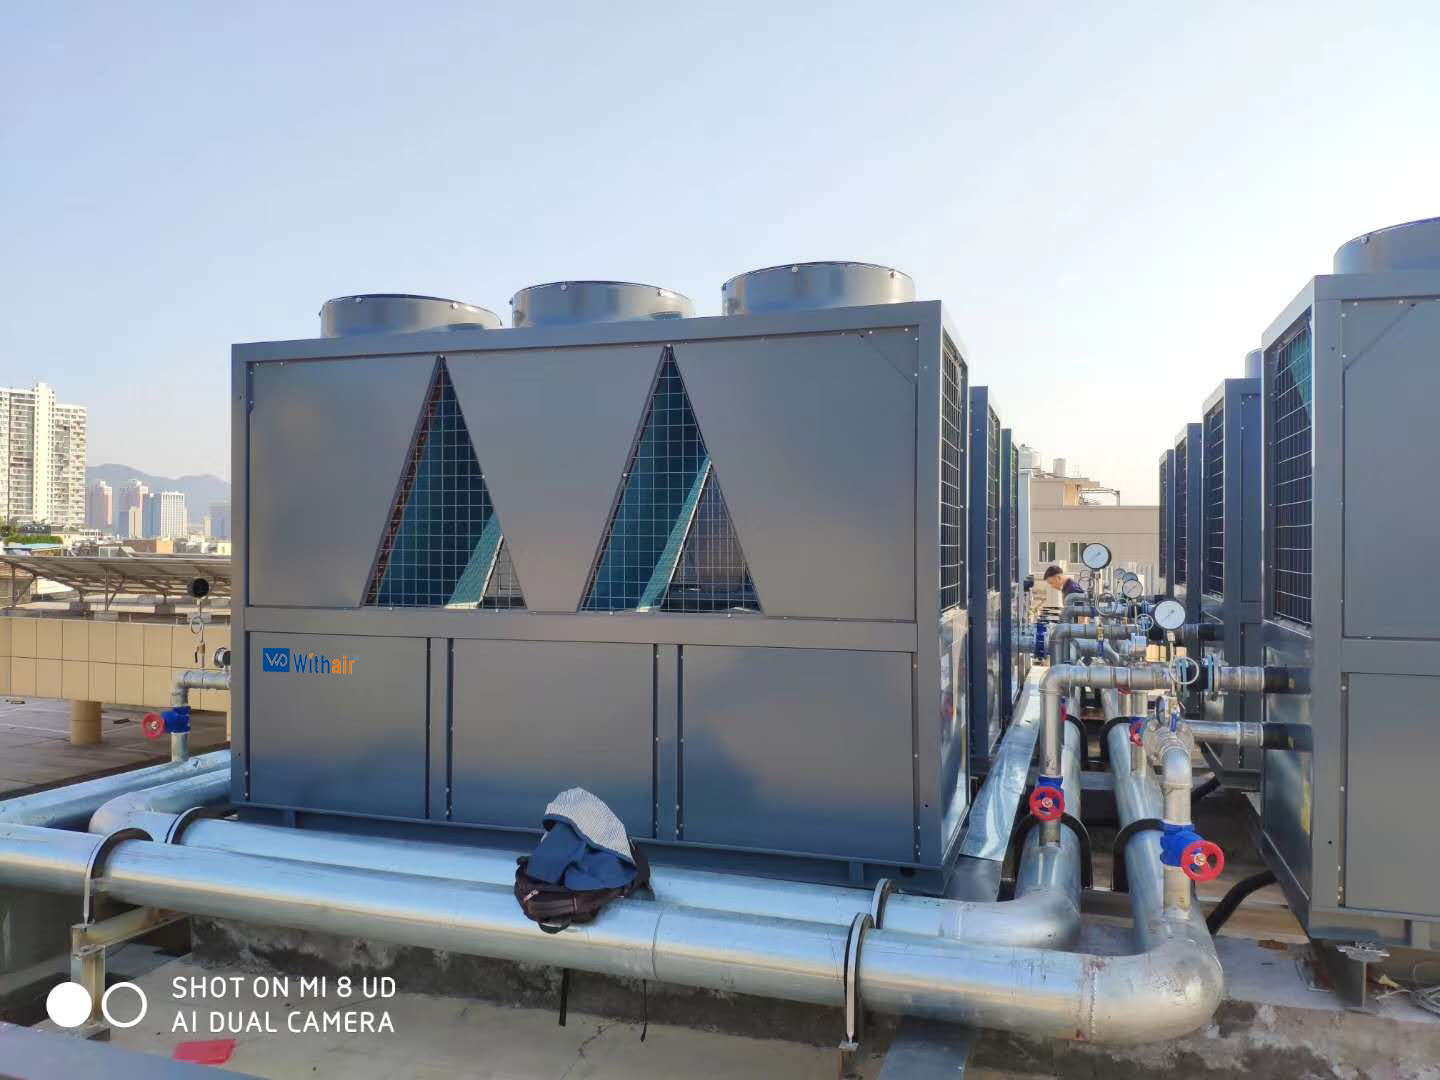 More efficient means of generating hot water through the application of air-cooled chiller systems with heat reclaim capabilities to reduce the energy consumption in buildings.